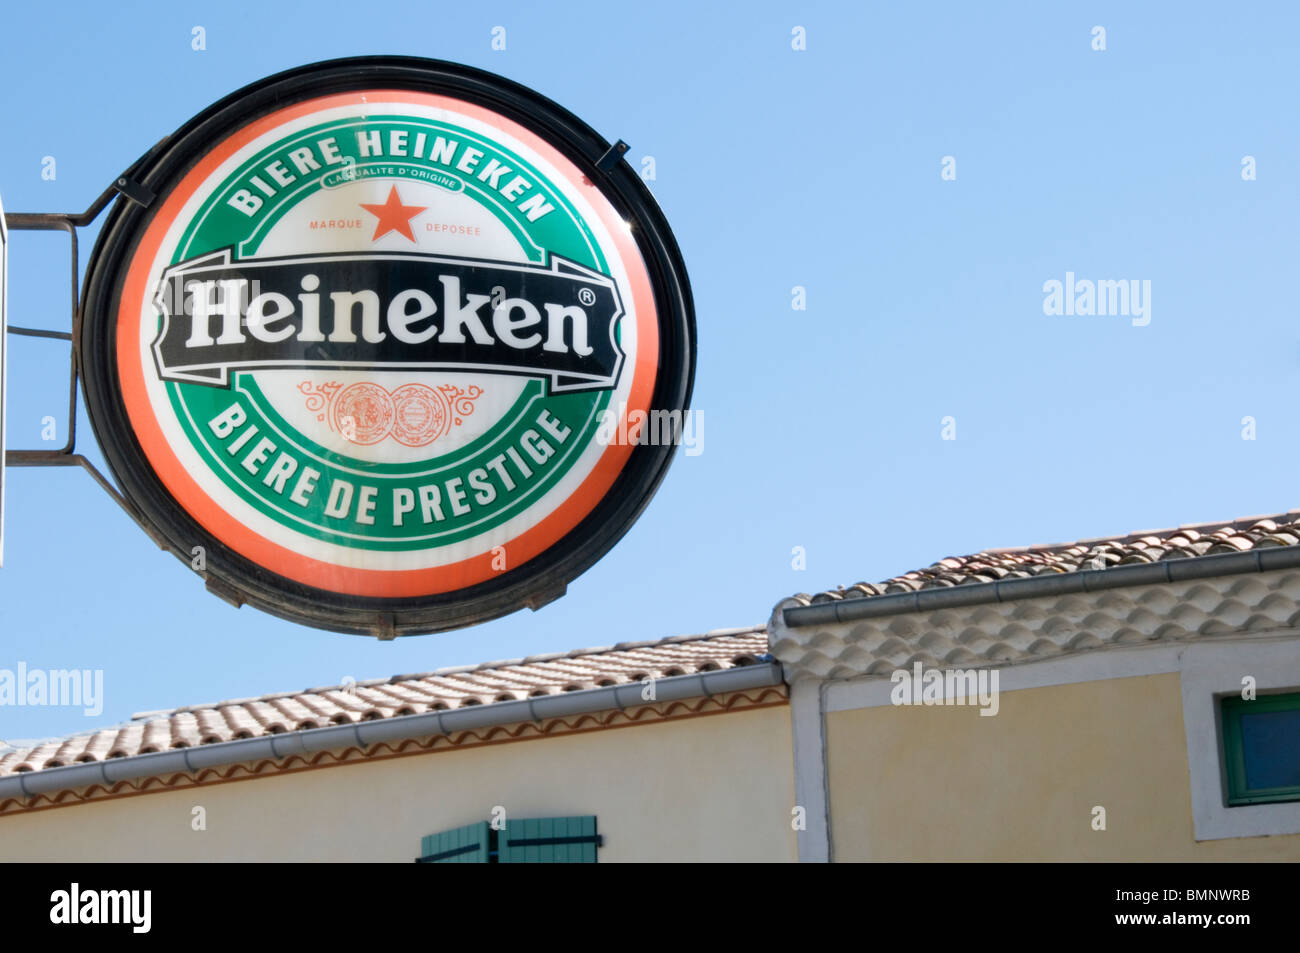 Heineken beer sign on a French cafe Stock Photo